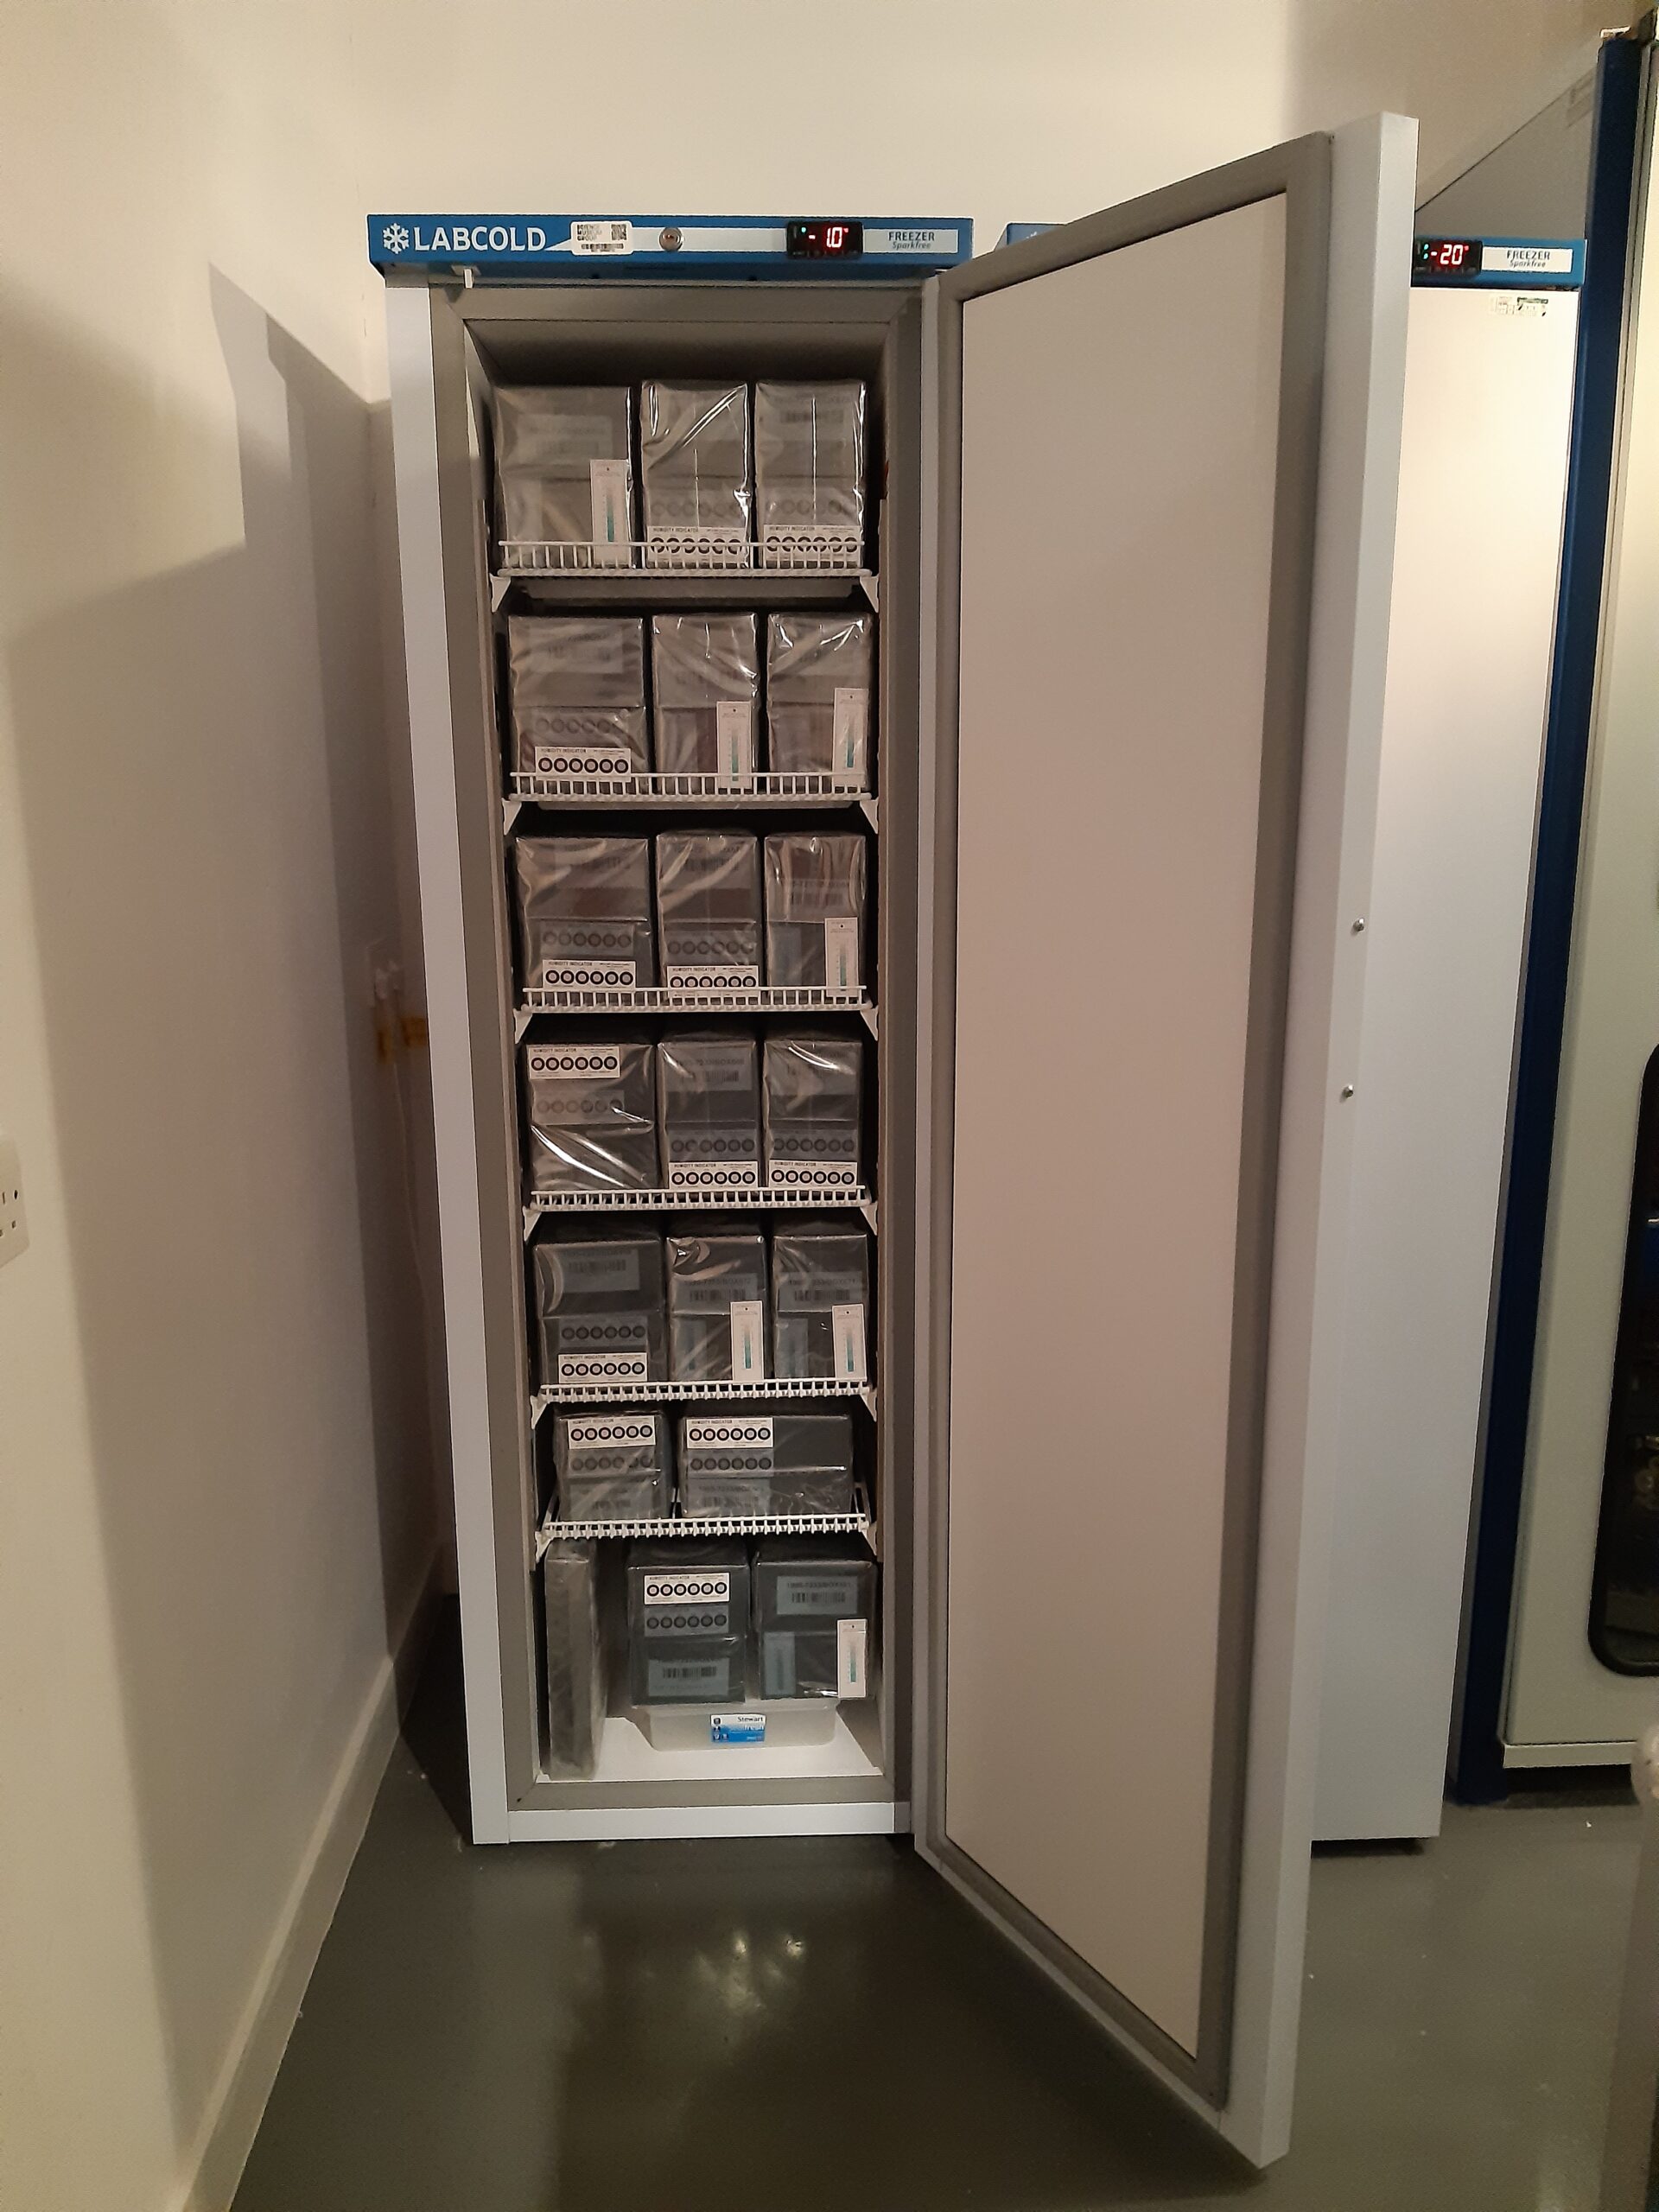 A tall thin freezer with the door open, showing shelves full of black boxes